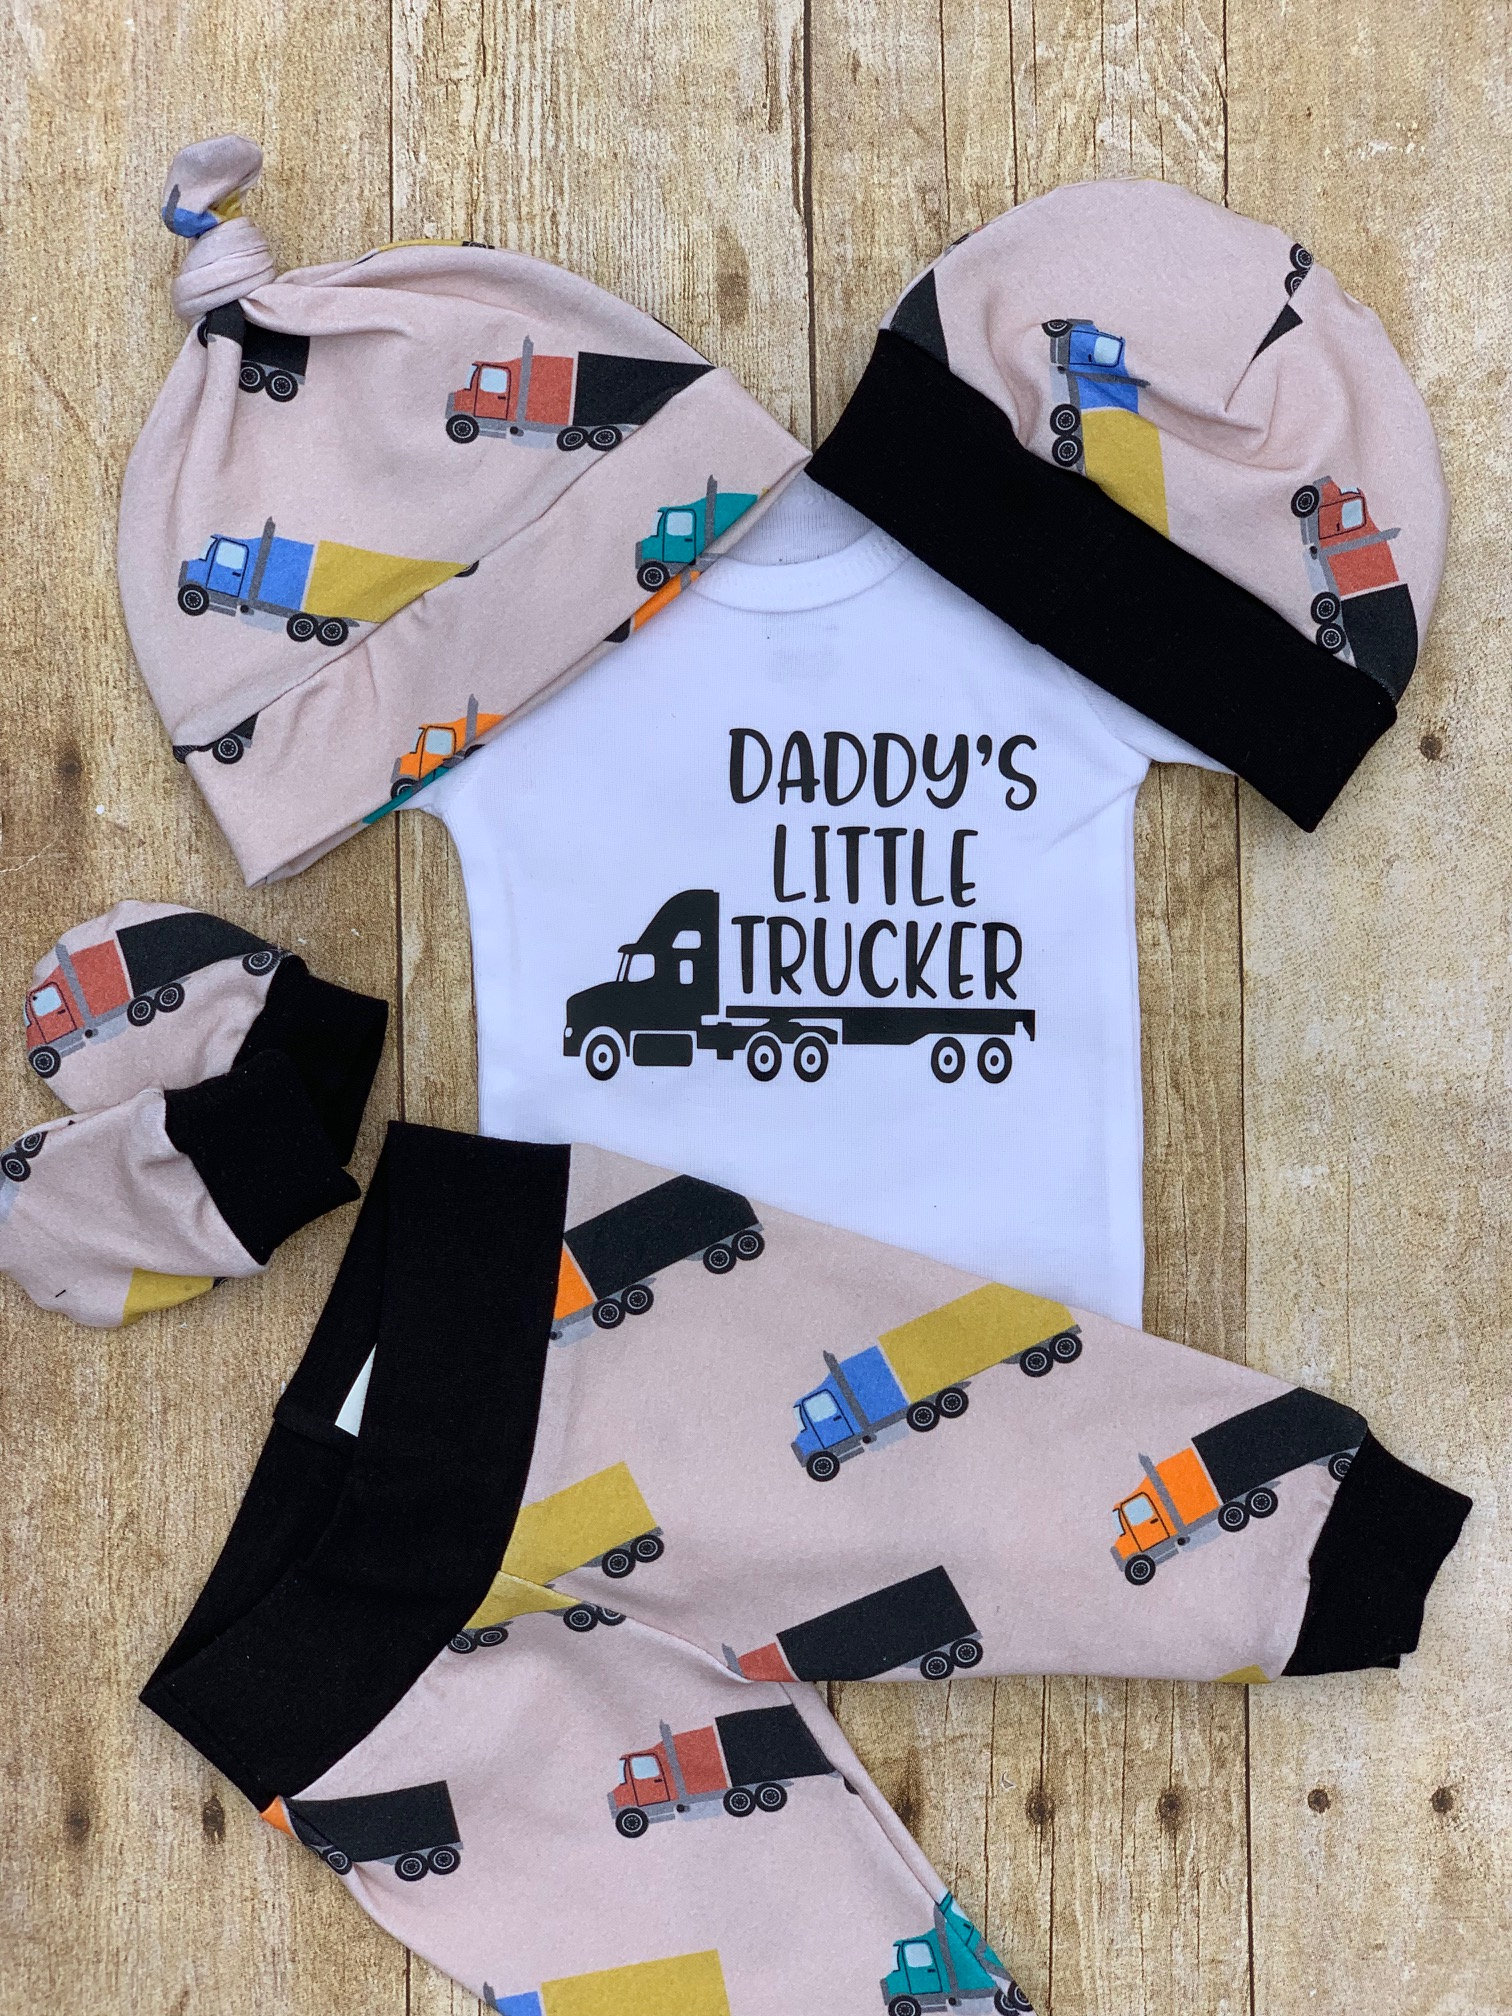 Daddy's Little Trucker Infant Outfit, Coming Home Baby Boy Outfit